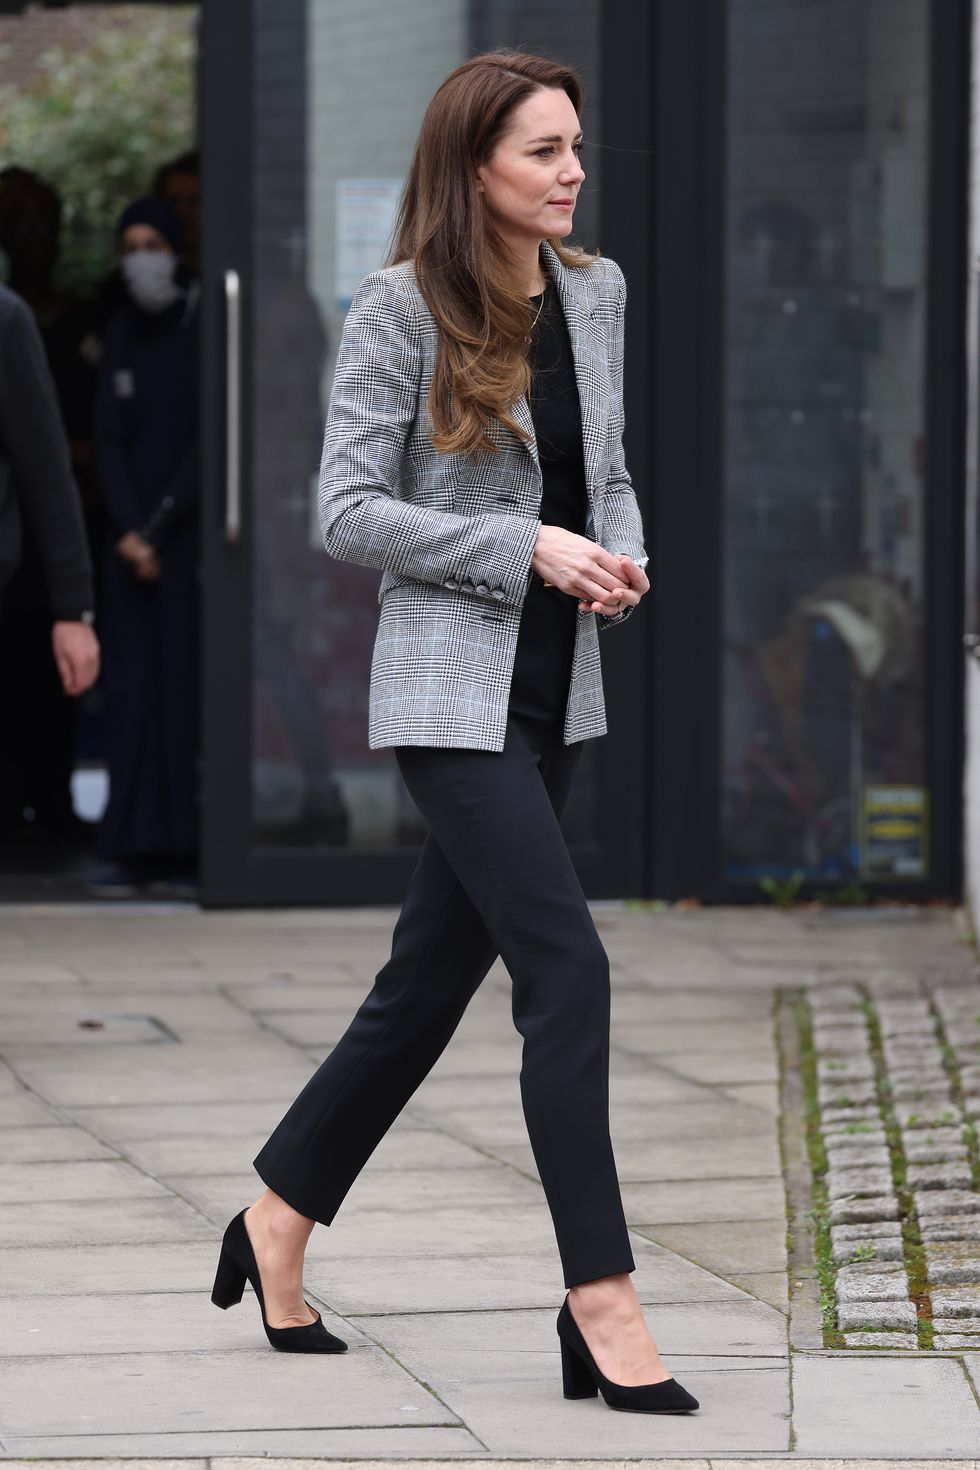 Kate Middleton Paired a Gray Plaid Blazer With an All-Black Look